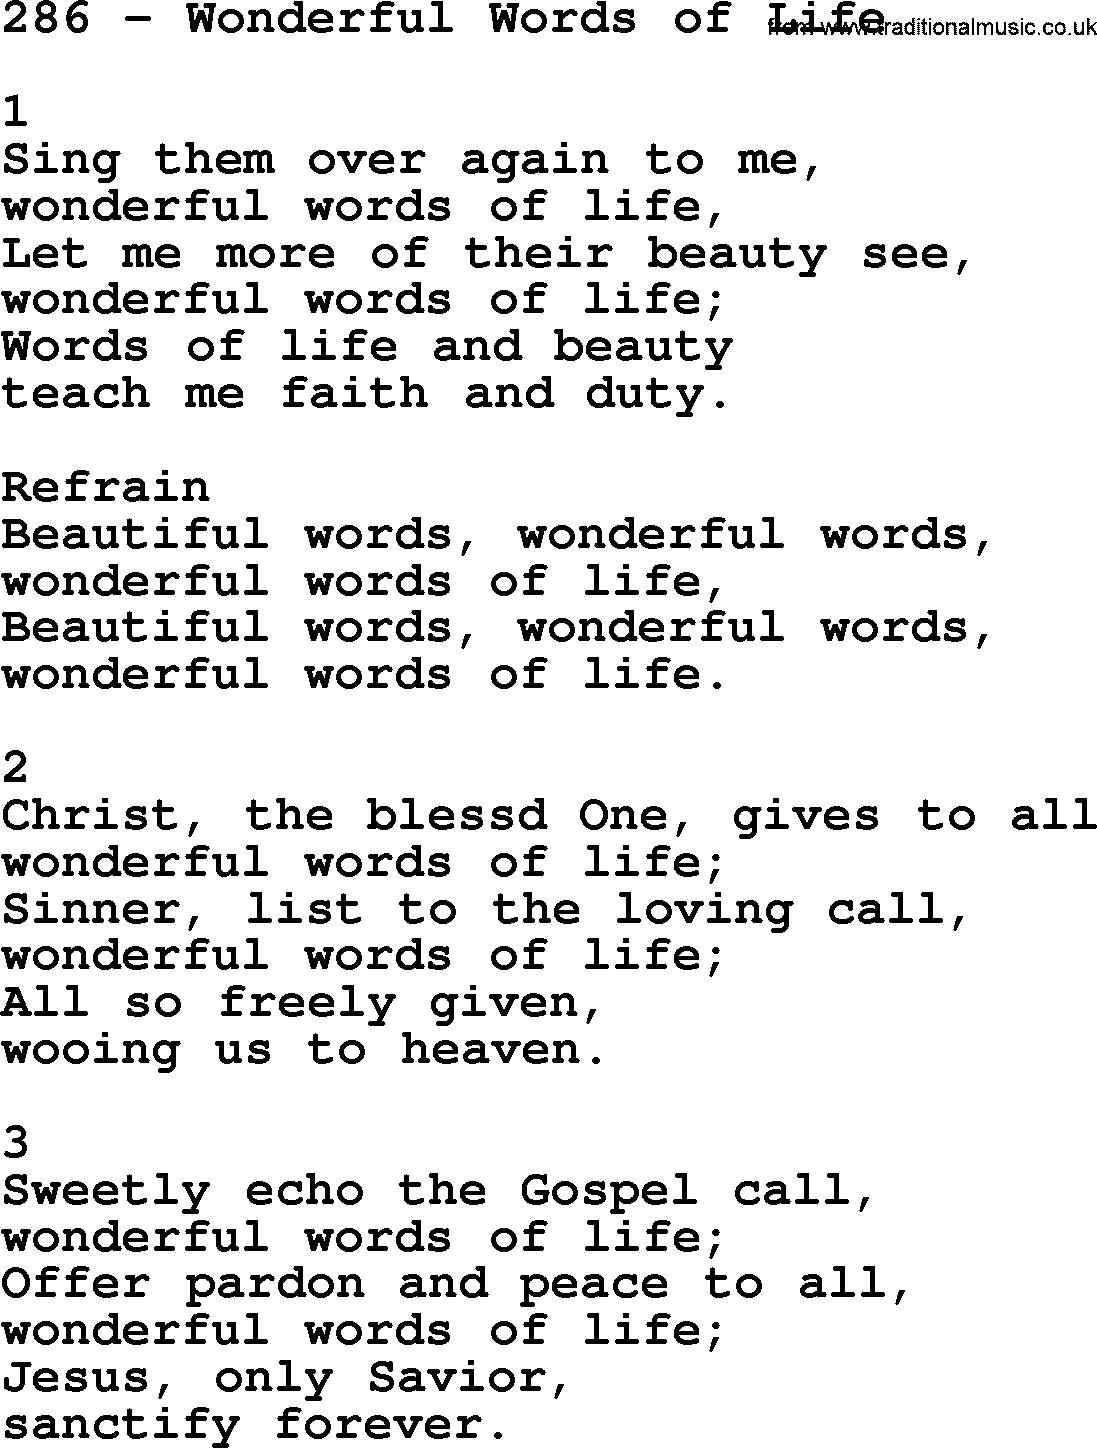 Complete Adventis Hymnal, title: 286-Wonderful Words Of Life, with lyrics, midi, mp3, powerpoints(PPT) and PDF,